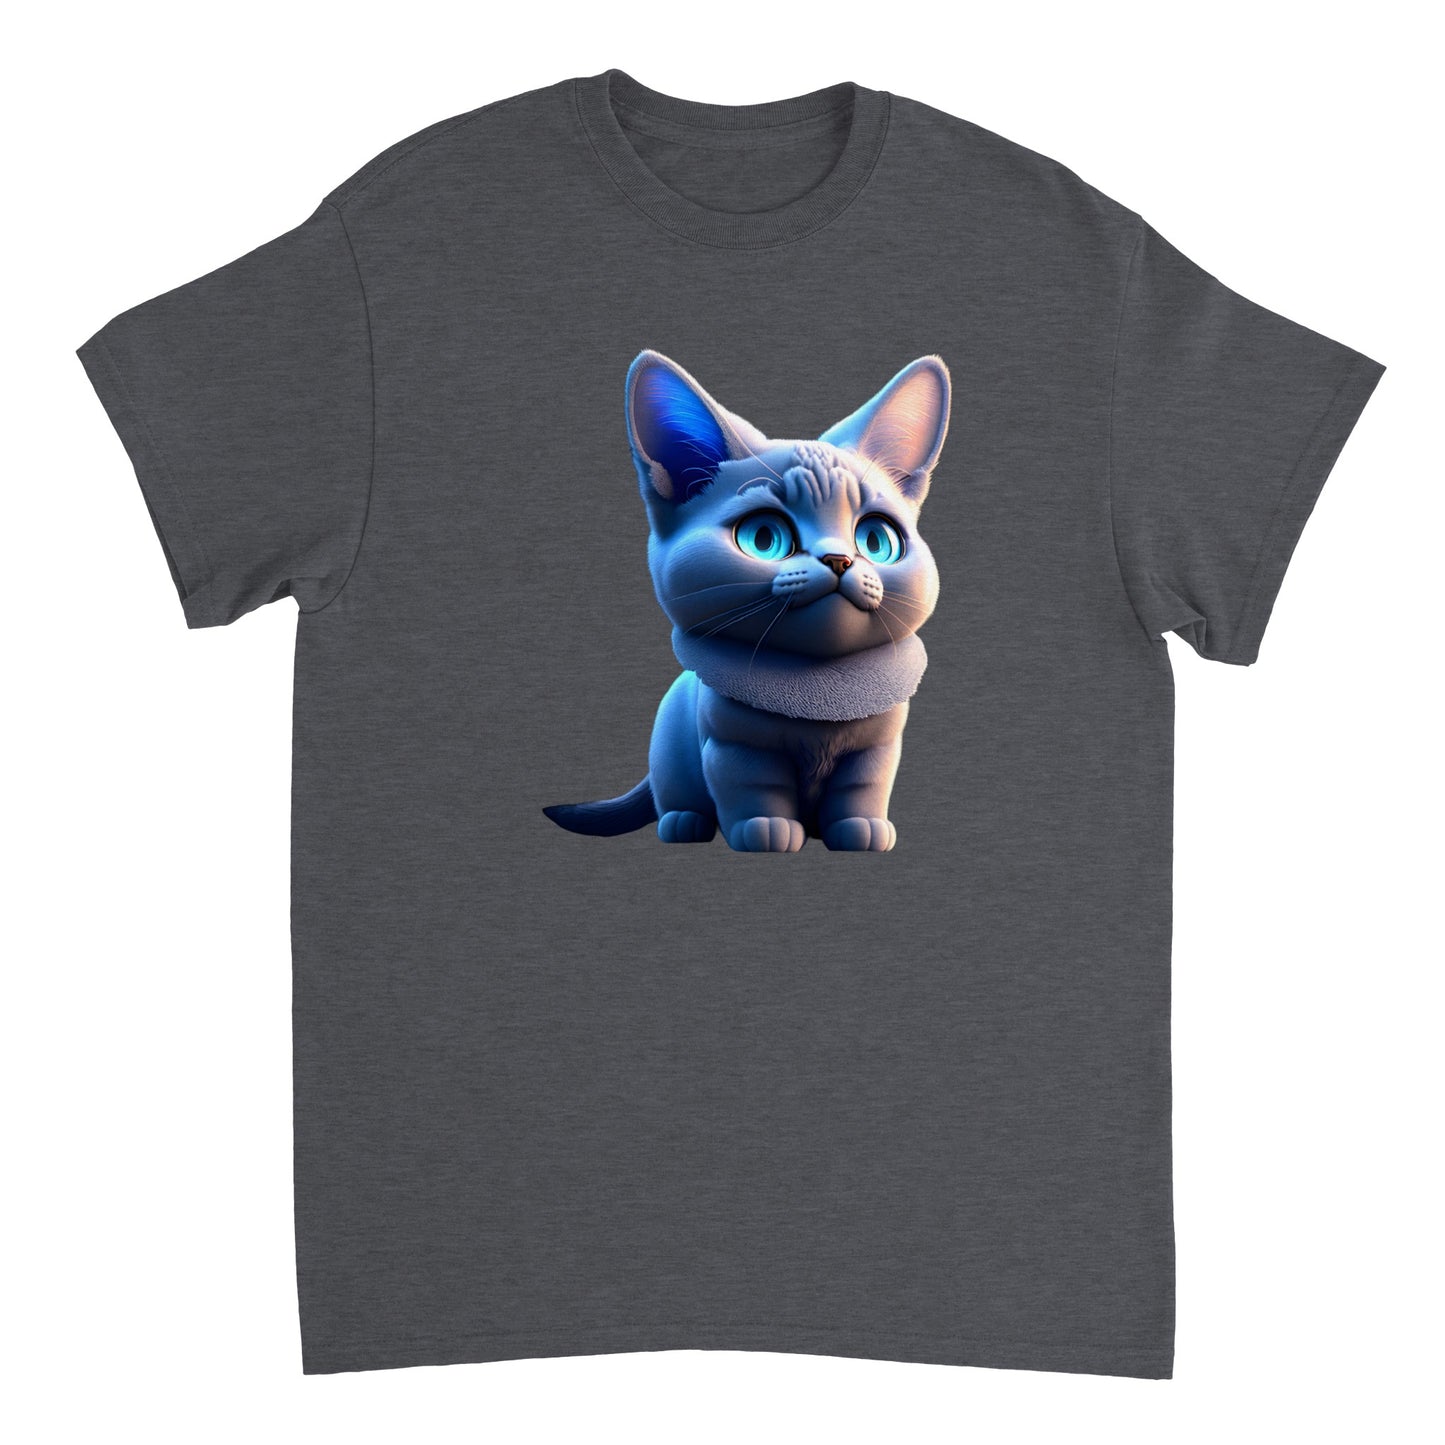 Adorable, Cool, Cute Cats and Kittens Toy - Heavyweight Unisex Crewneck T-shirt 45